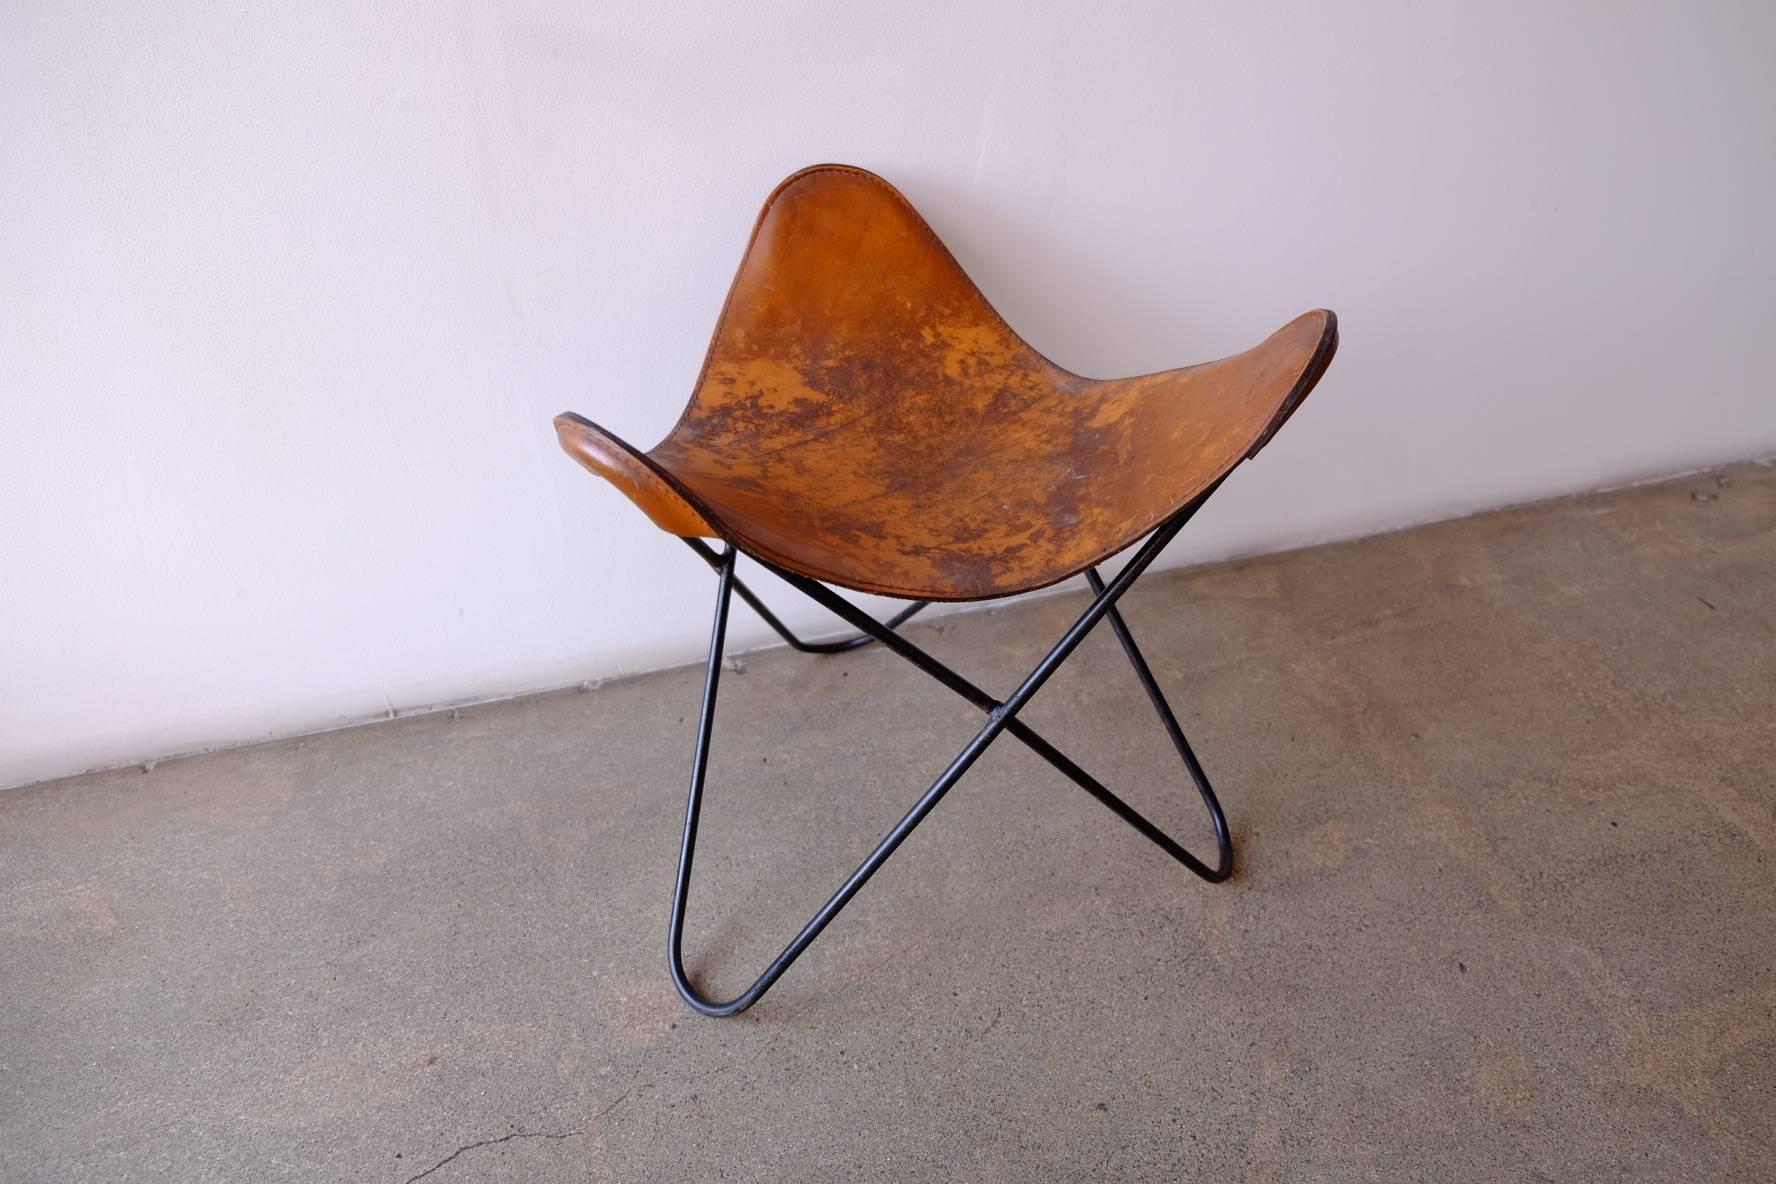 Distressed leather and iron butterfly sling stool by Jorge Ferrari-Hardoy for Knoll. Made in USA, circa 1950s.